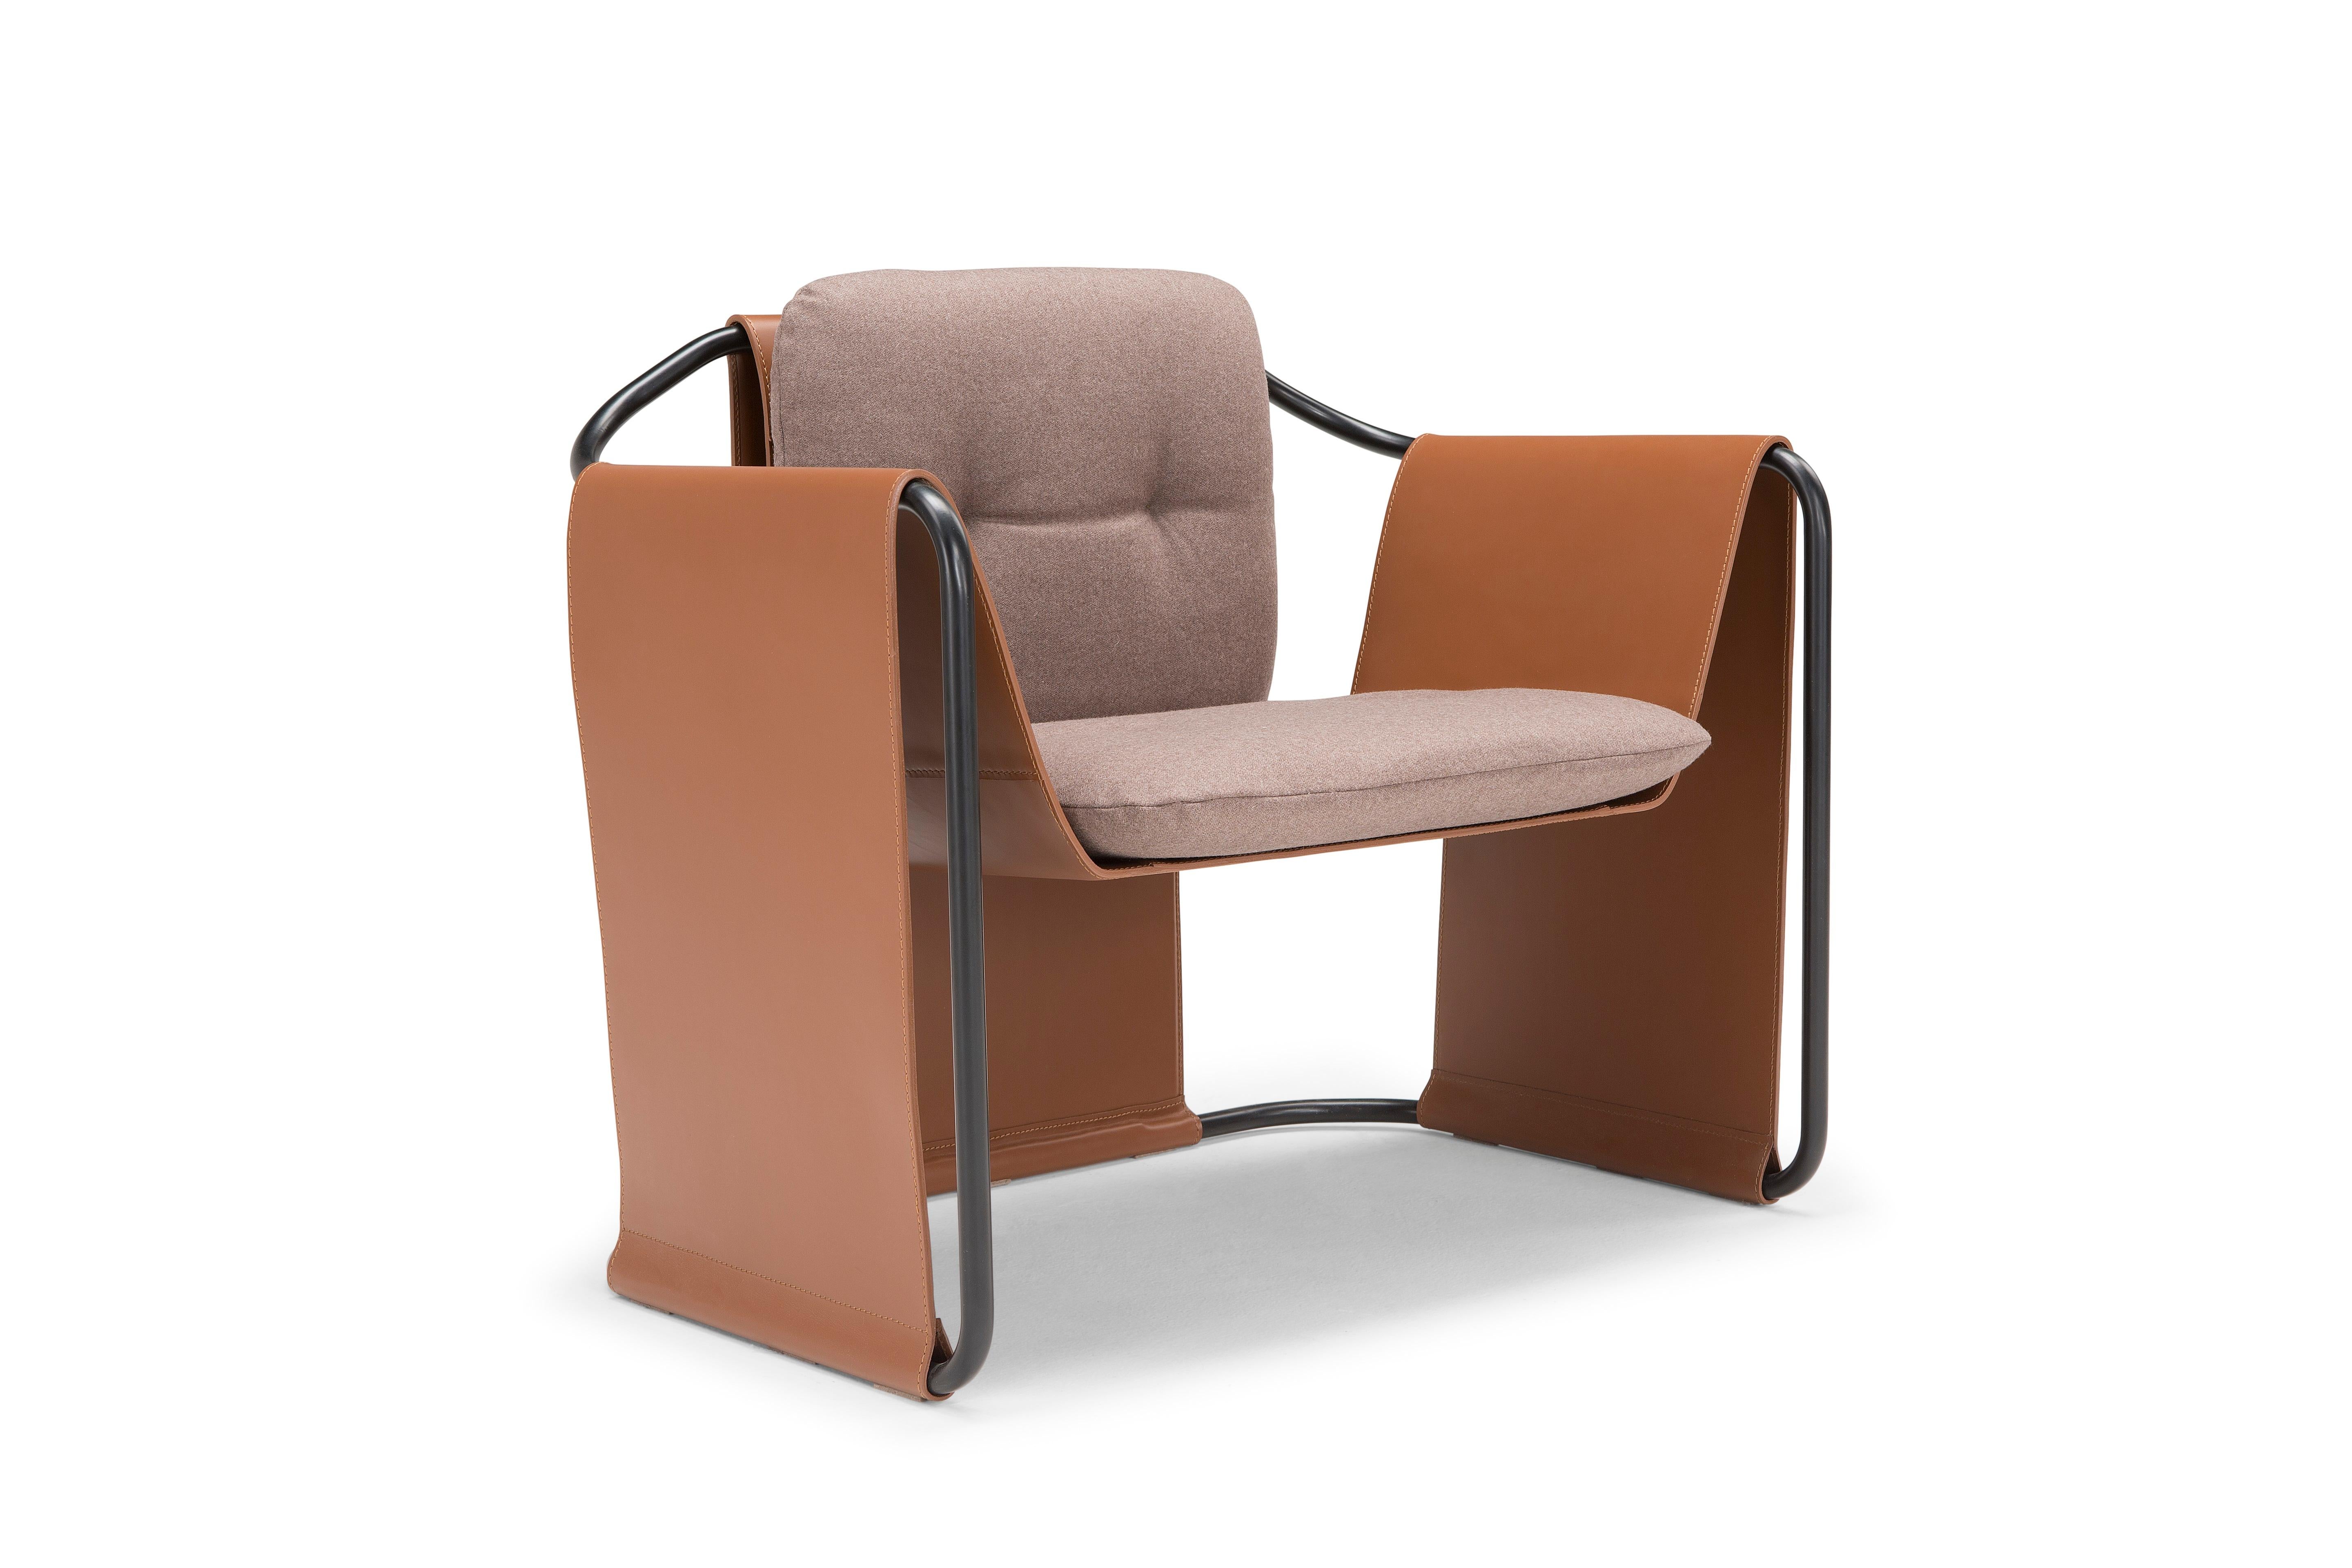 Kimono is an elegant armchair, made of two elements: a tubular metal structure and leather coverage. The essence of the design is where the original personality of Kimono originates, as seen in the craftsmanship of the cover and the attention to